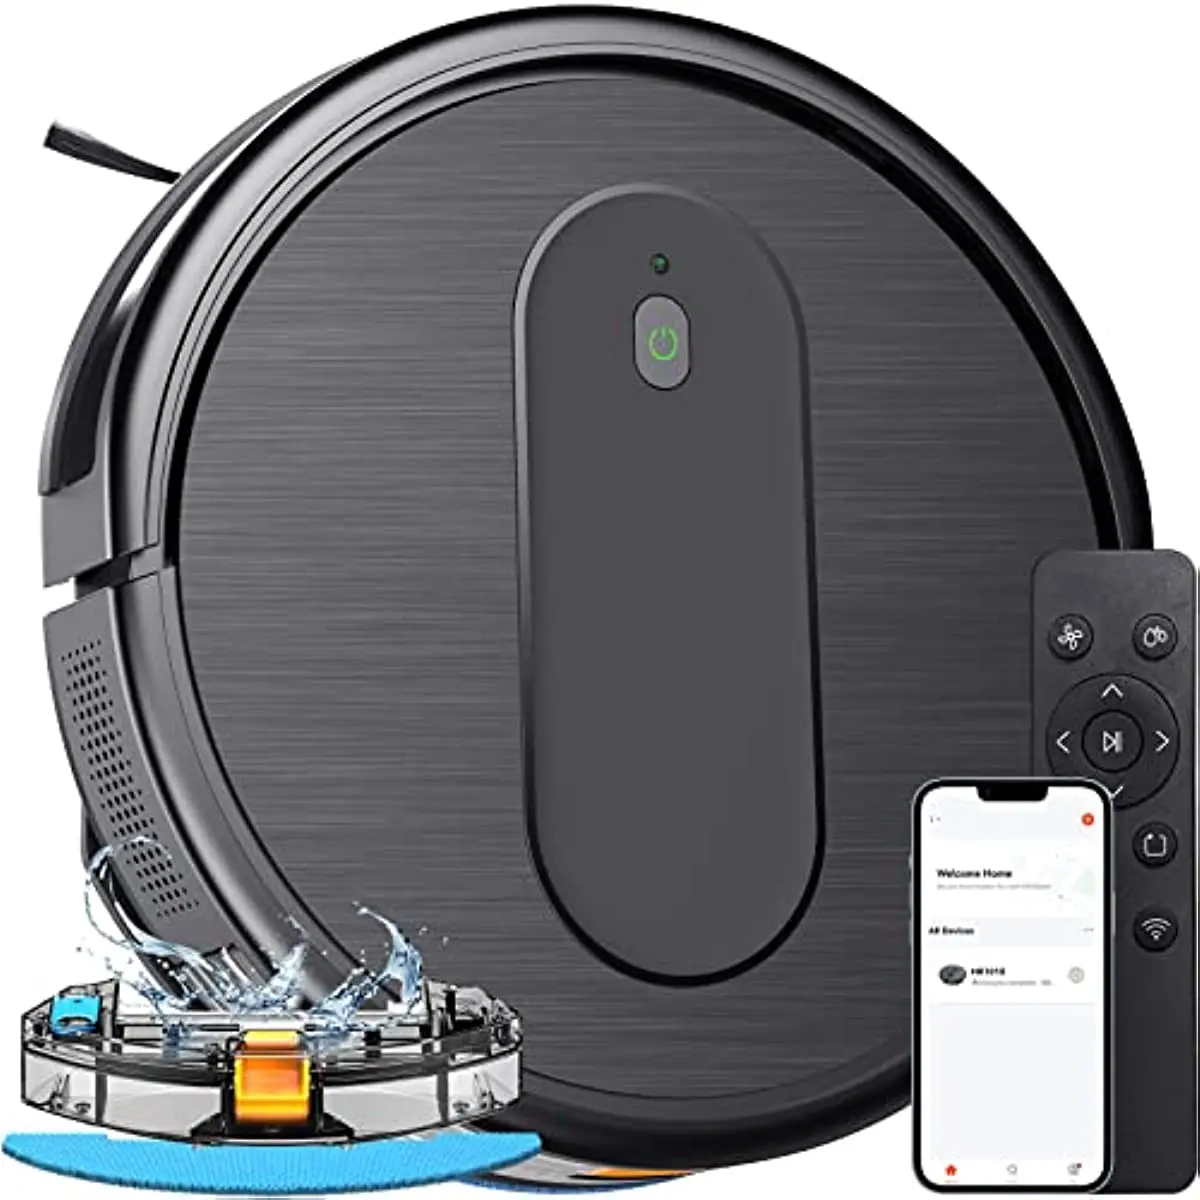 

Robot Vacuum and Mop Combo, 3 in 1 Mopping Robotic Vacuum with Schedule, App/2.4Ghz Wi-Fi/Alexa, 1600Pa Max Suction